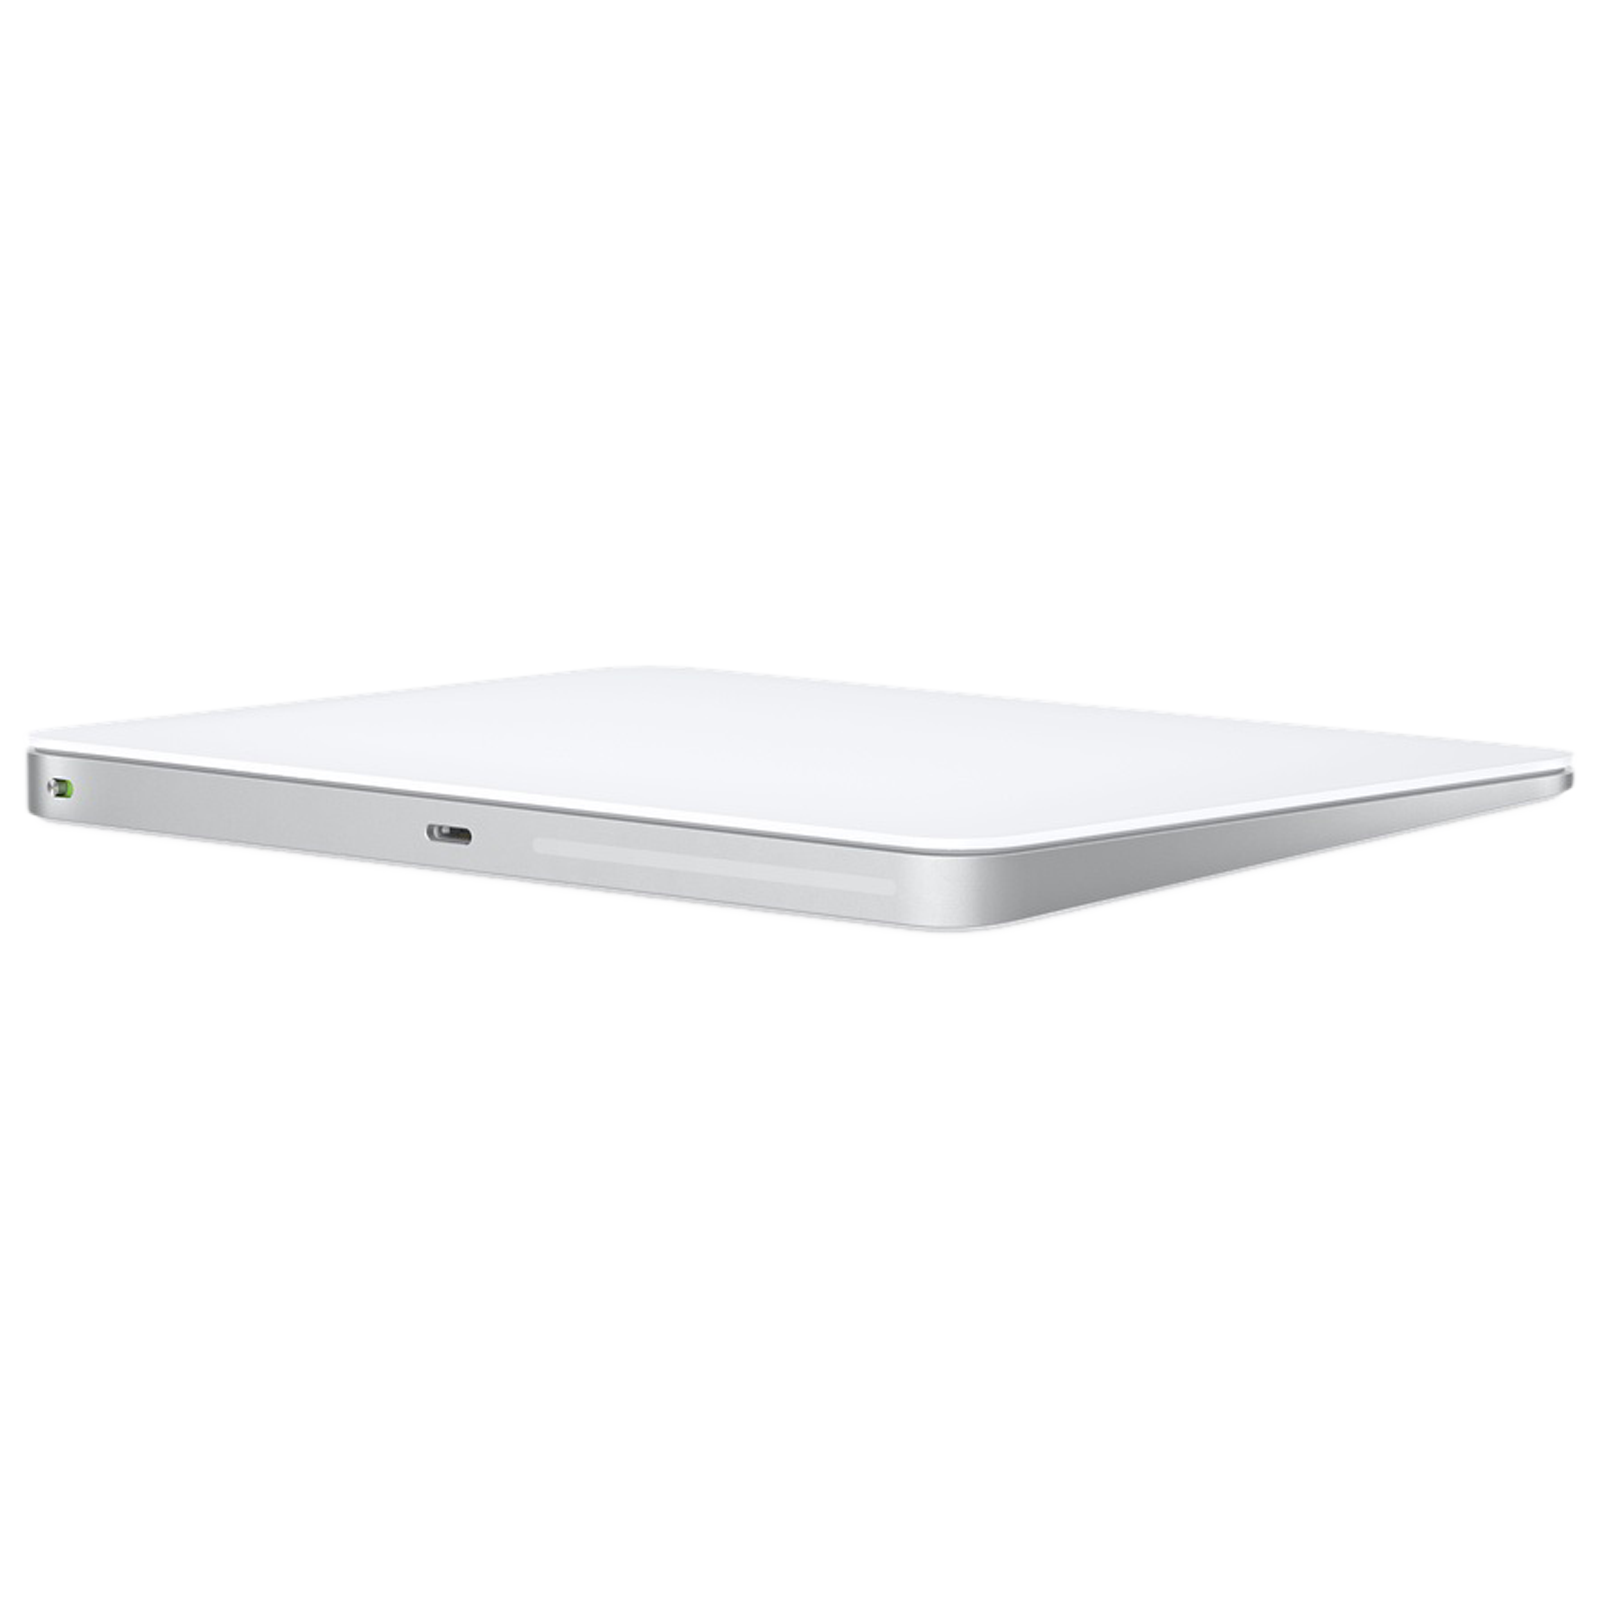 Buy Apple Magic Trackpad 2 Touchpad For MacBook (Wireless 